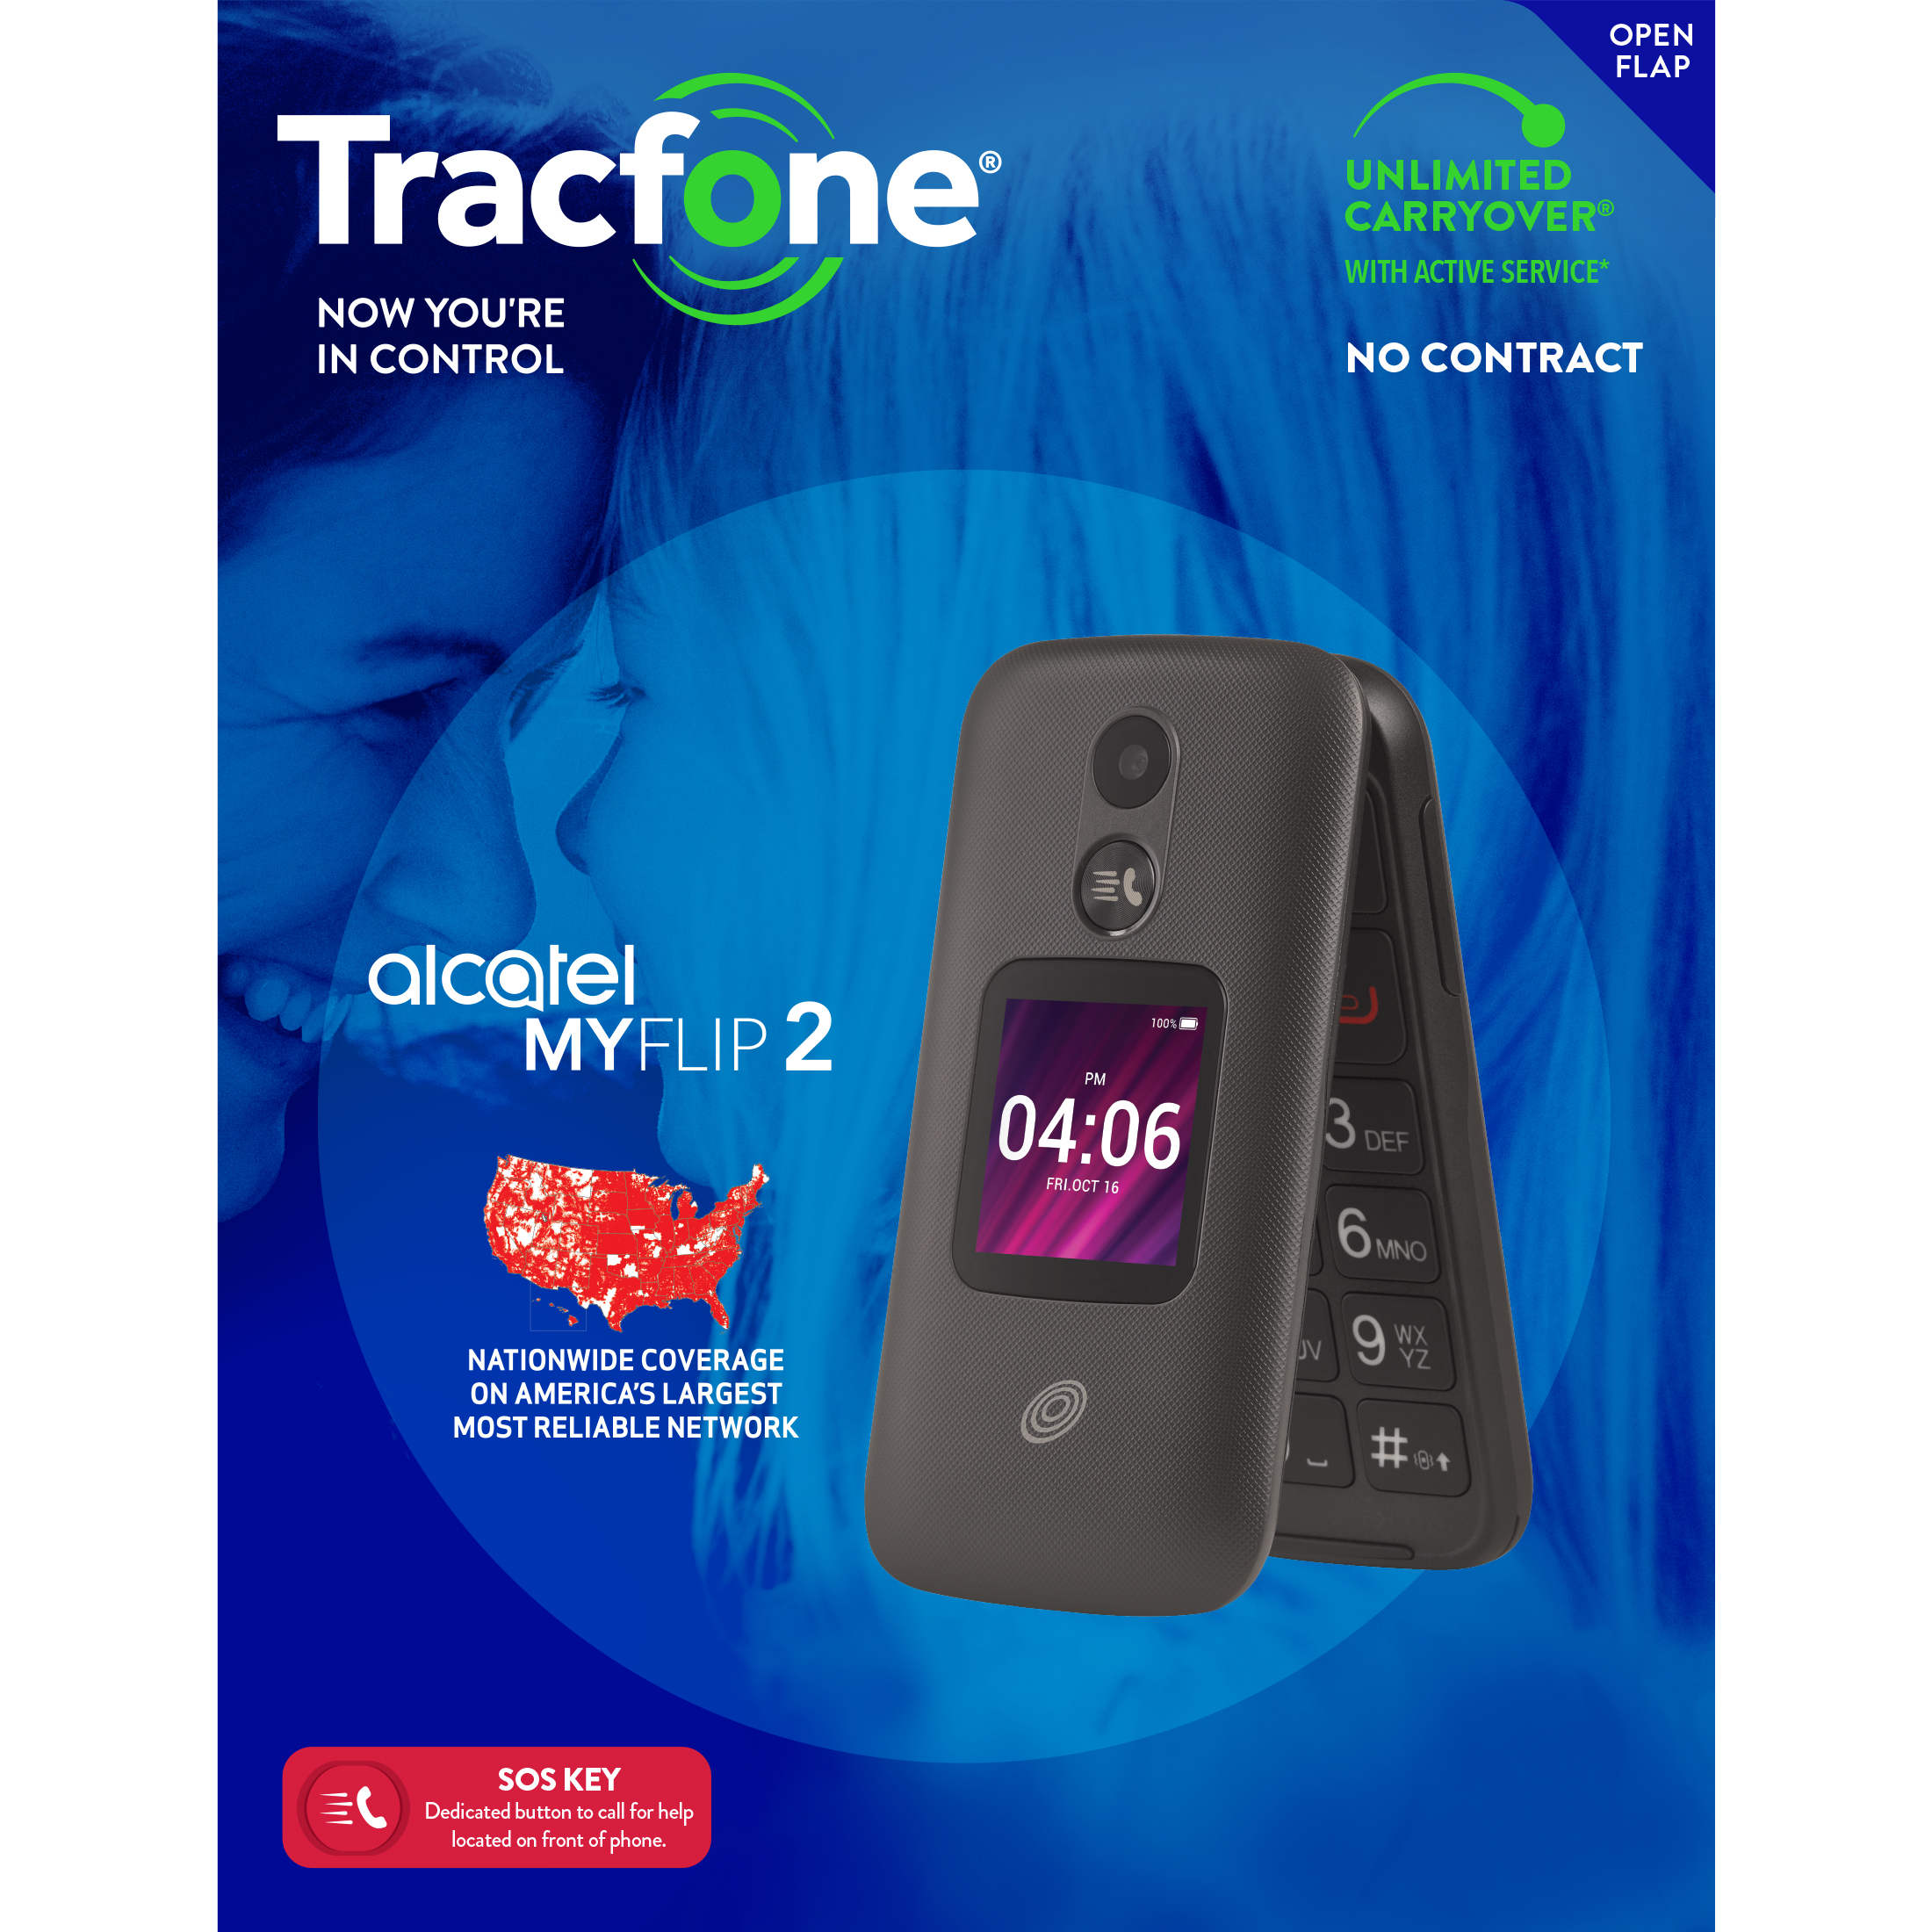 Tracfone TCL MyFlip 2, 4GB Black- Prepaid Phone [Locked to Tracfone Wireless] - image 16 of 16